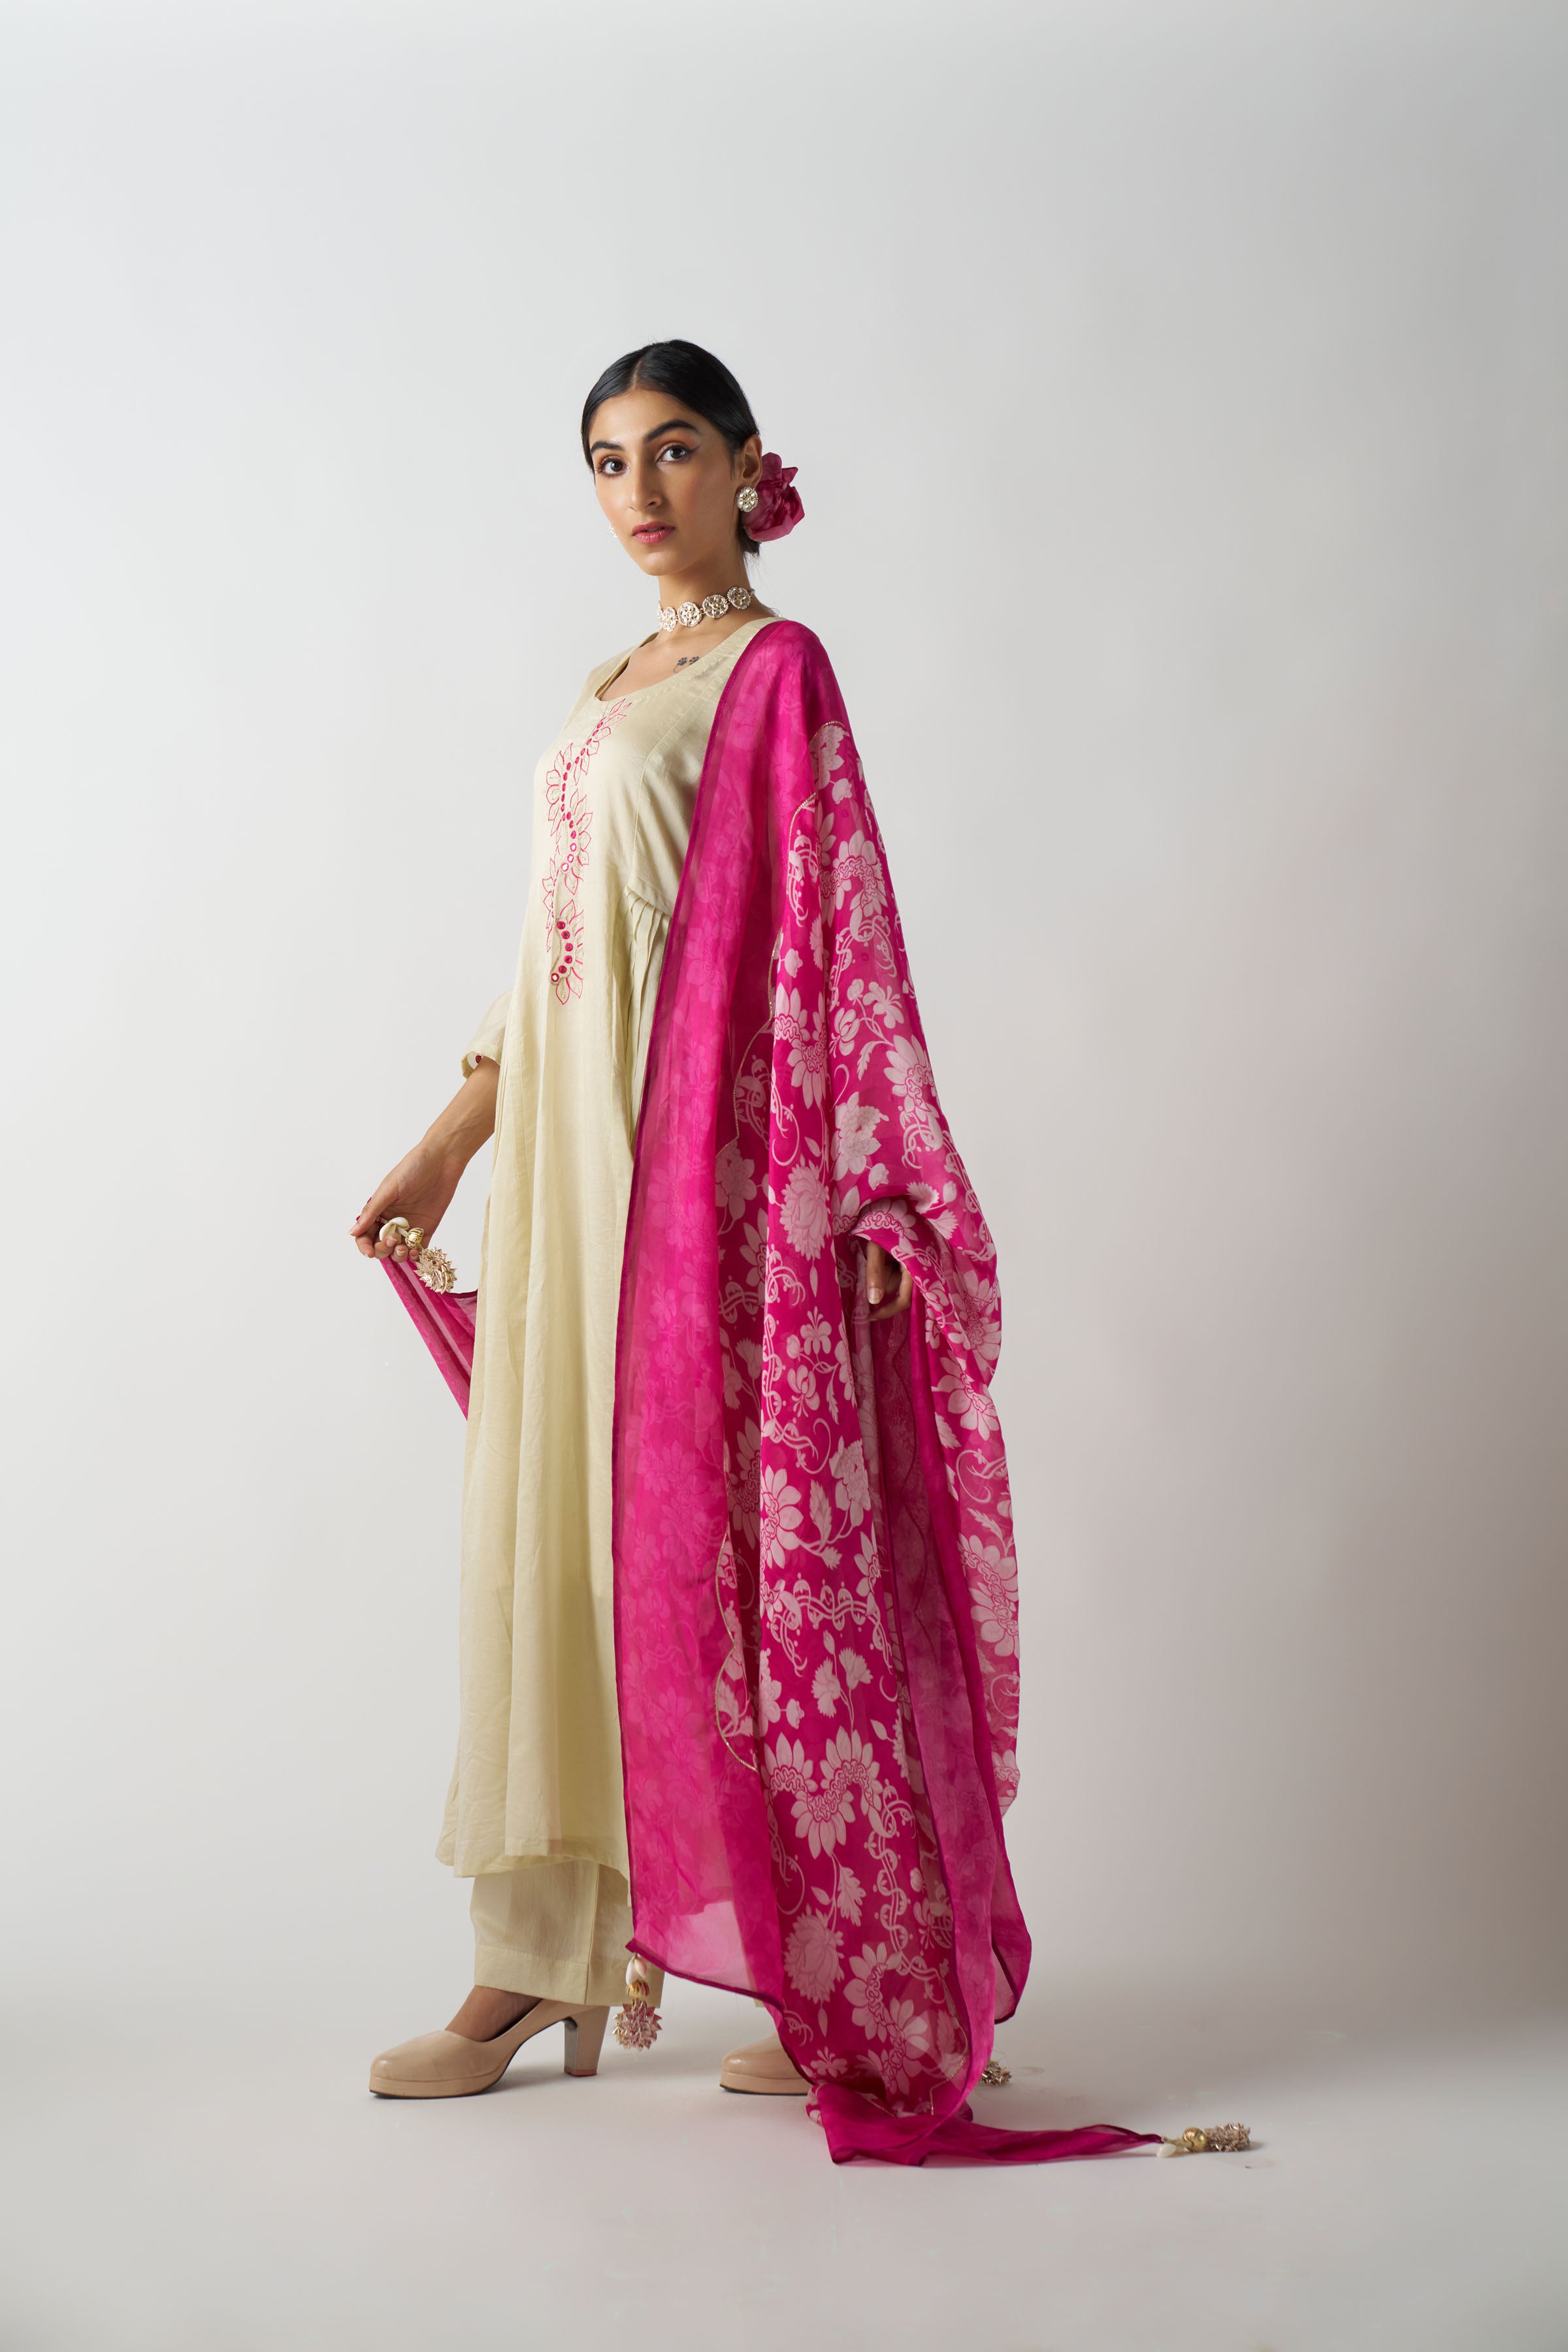 Off White 3 Piece Suit With Fuchsia Pink Dupatta